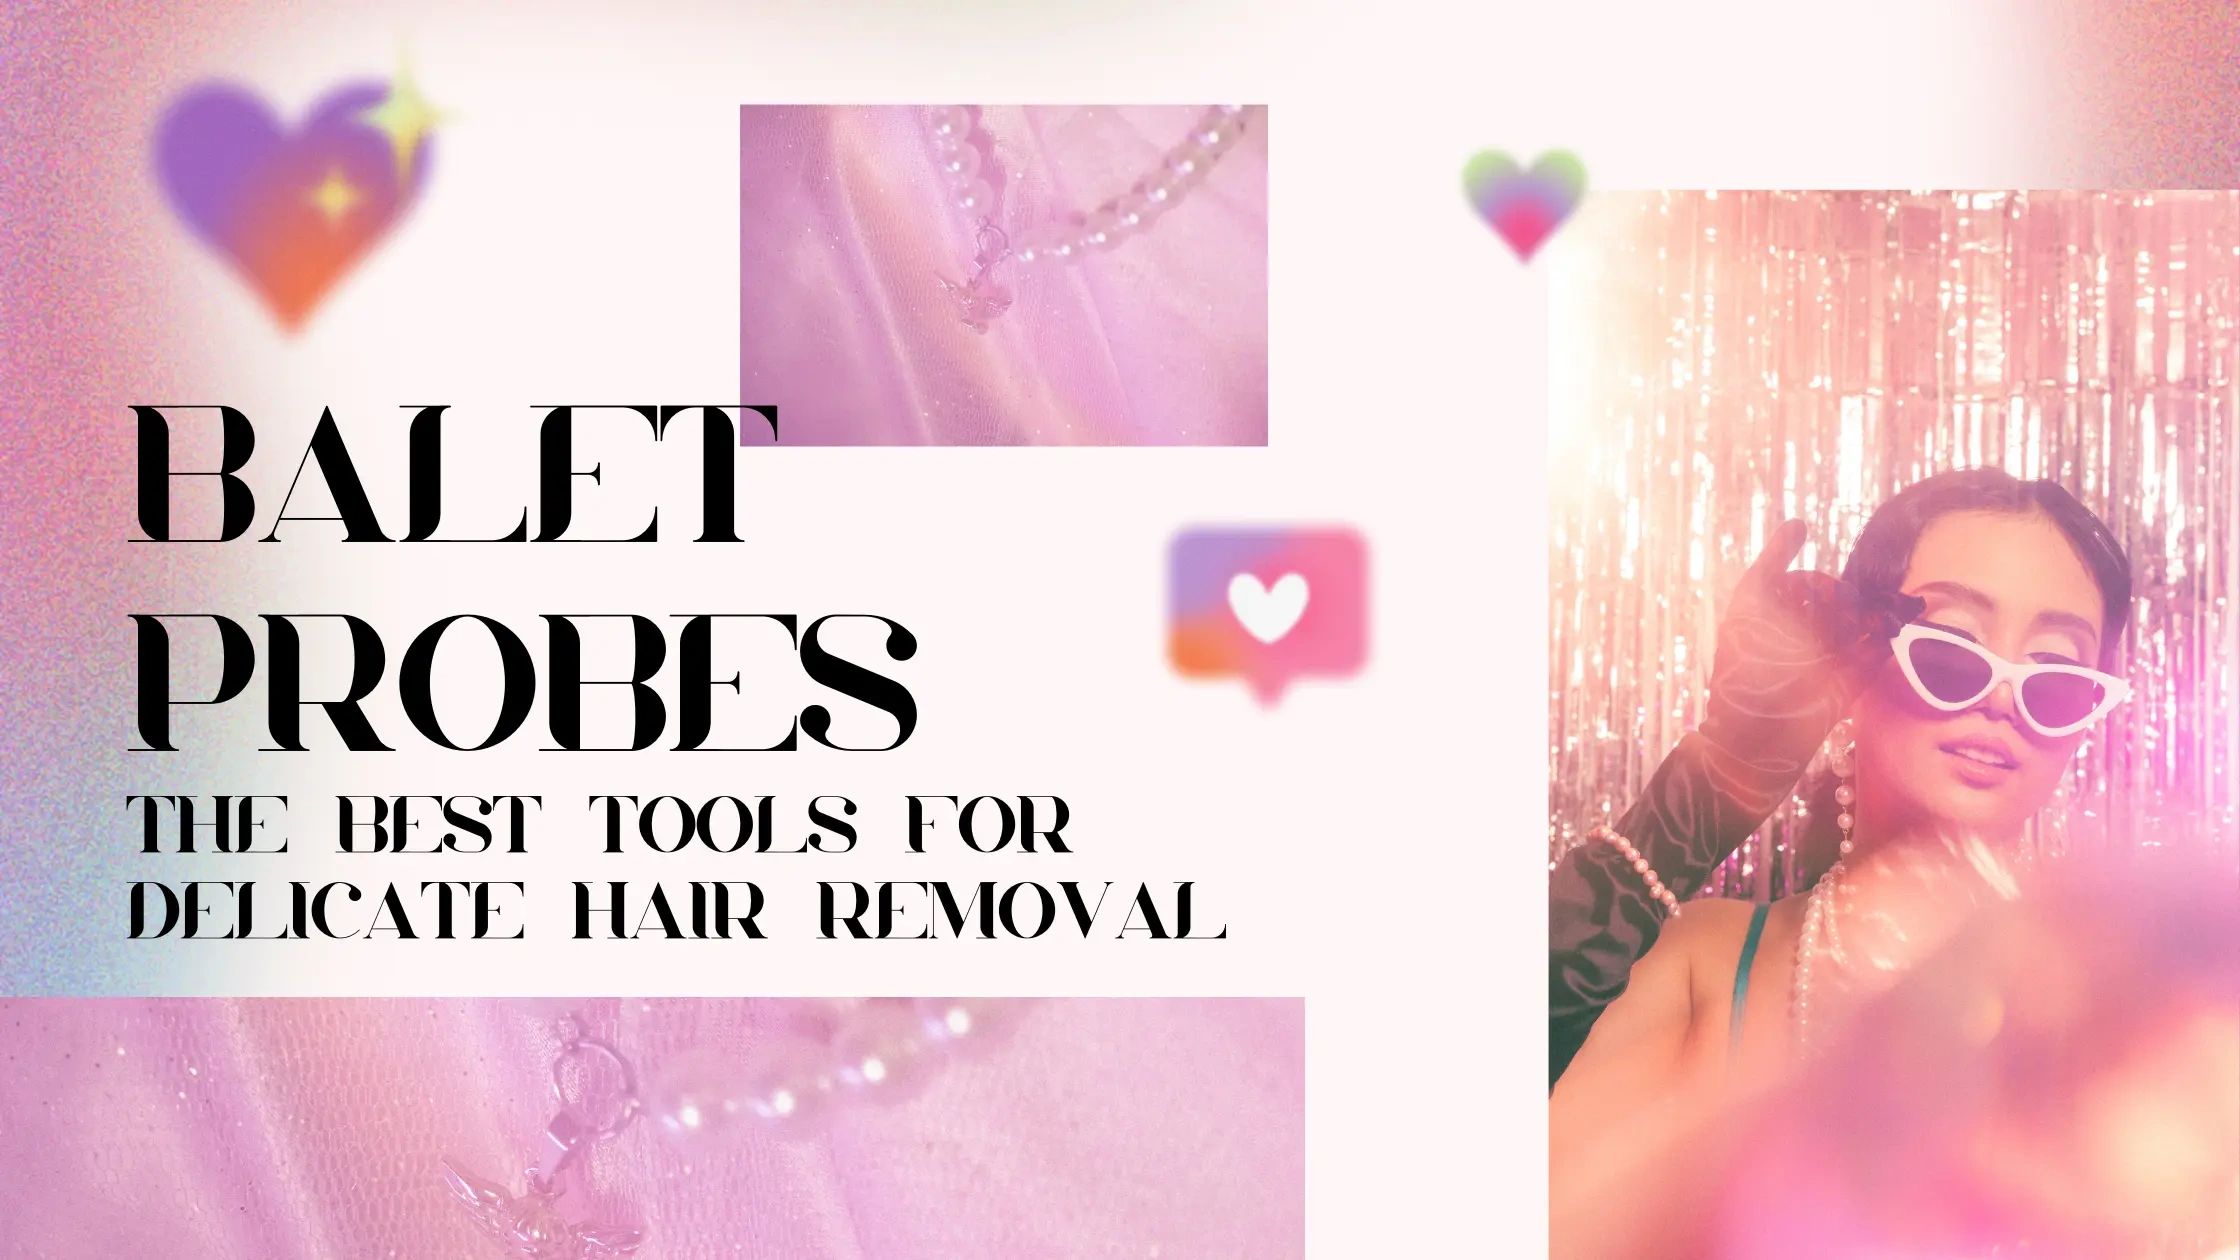 Ballet Probes: The Best Tools for Delicate Hair Removal